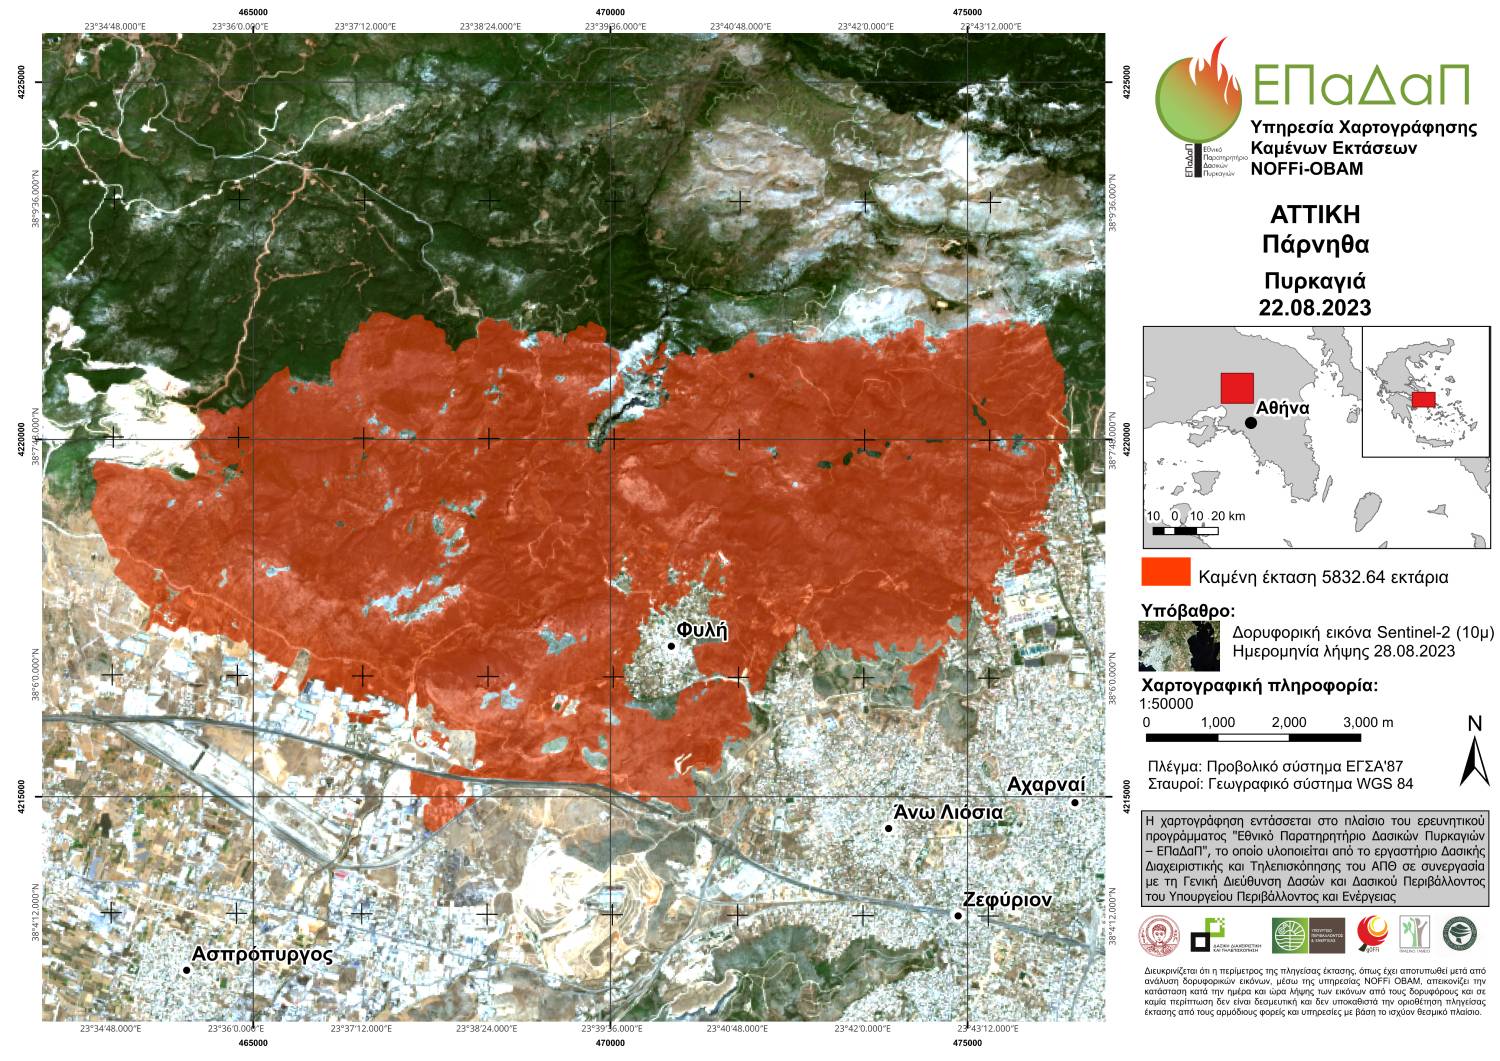 over-82600-hectares-consumed-in-evros-by-aug-28-fresh-satellite-data-show2